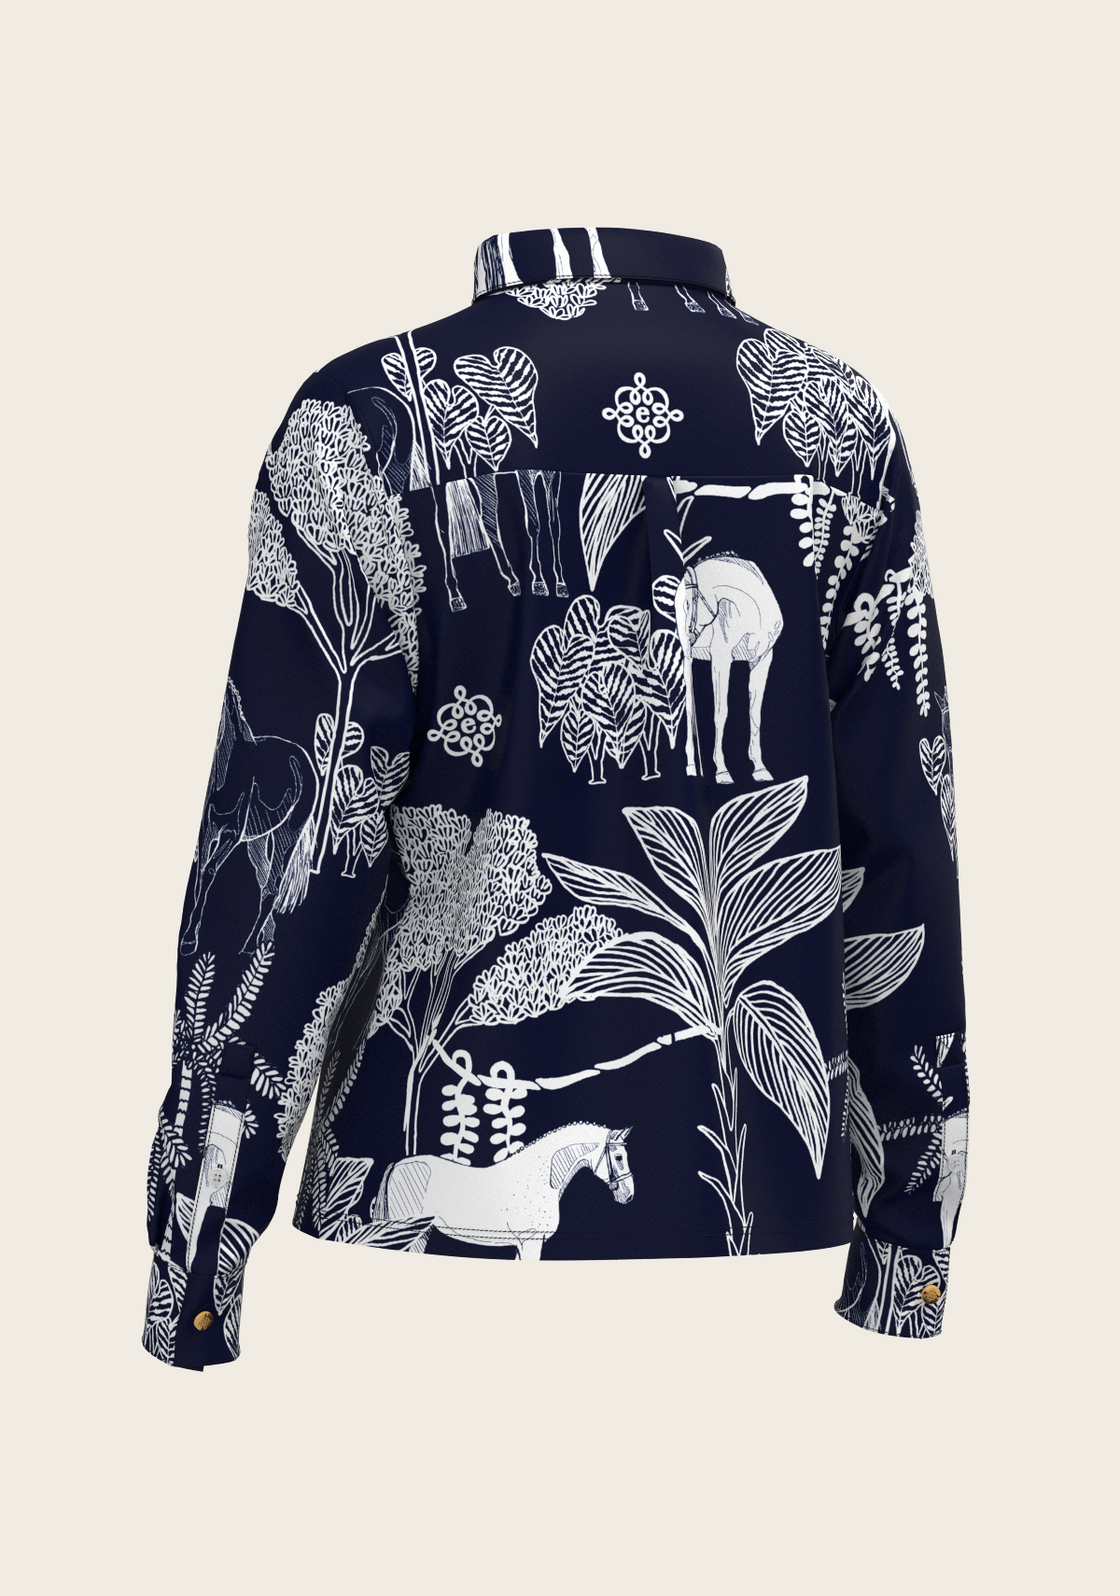  Island Horses on Navy Loose Fitting Button Shirt